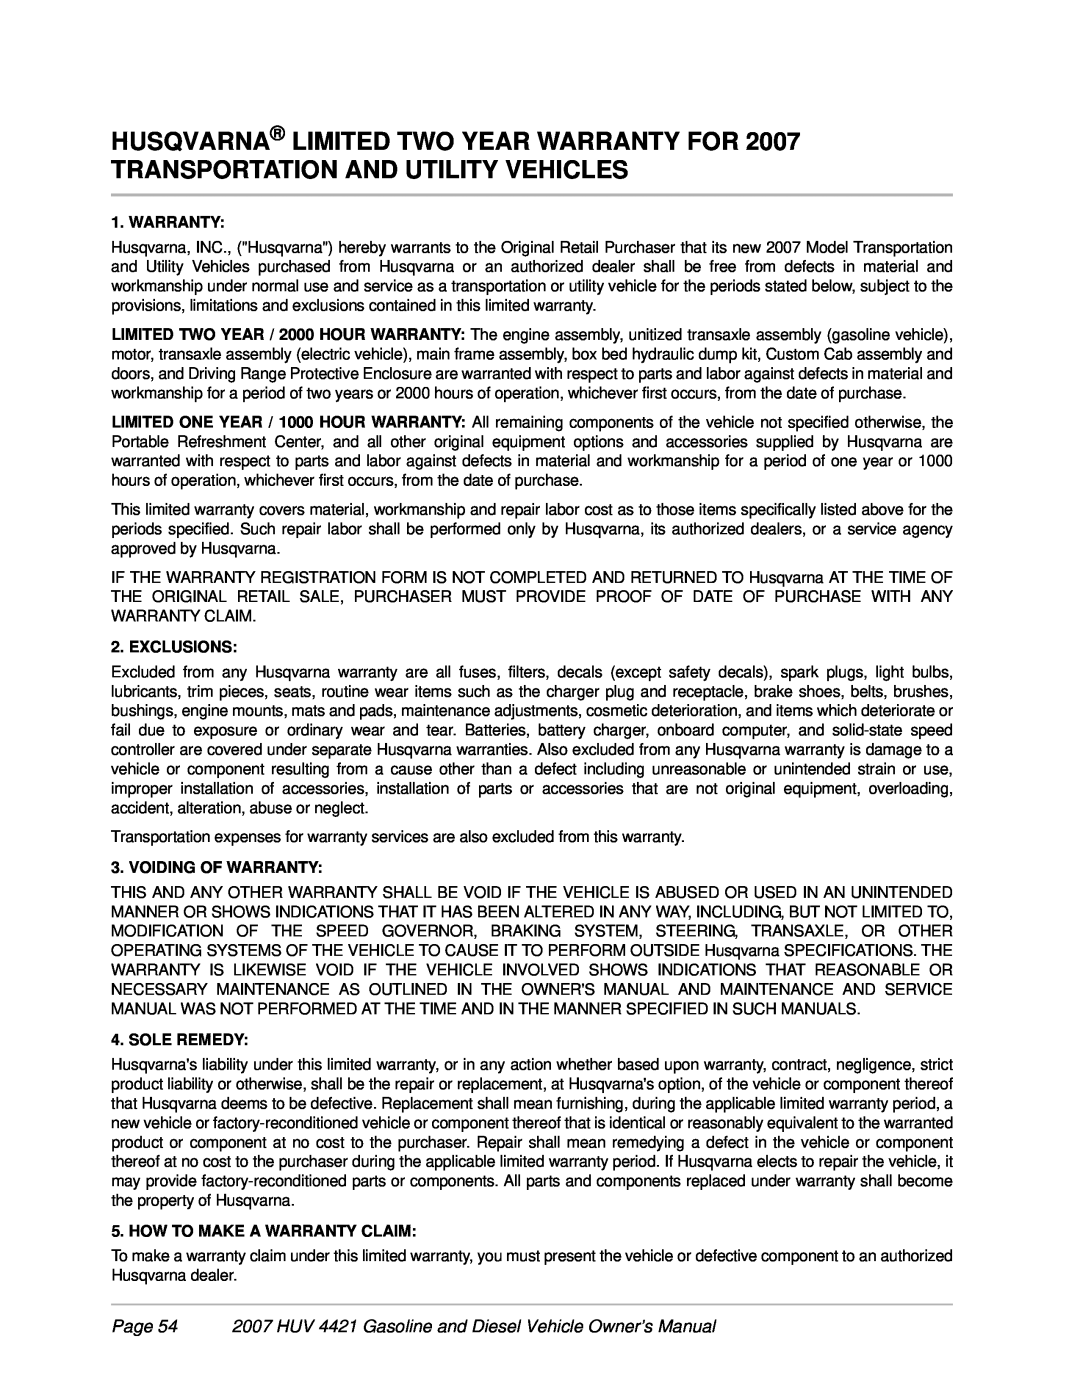 Husqvarna HUV 4421-G / GXP Page 54 2007 HUV 4421 Gasoline and Diesel Vehicle Owner’s Manual, Warranty, Exclusions 